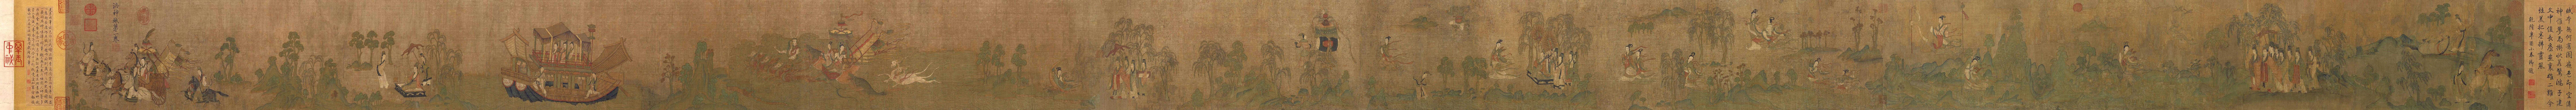 Gu Kaizhi: Nymph of the Luo River